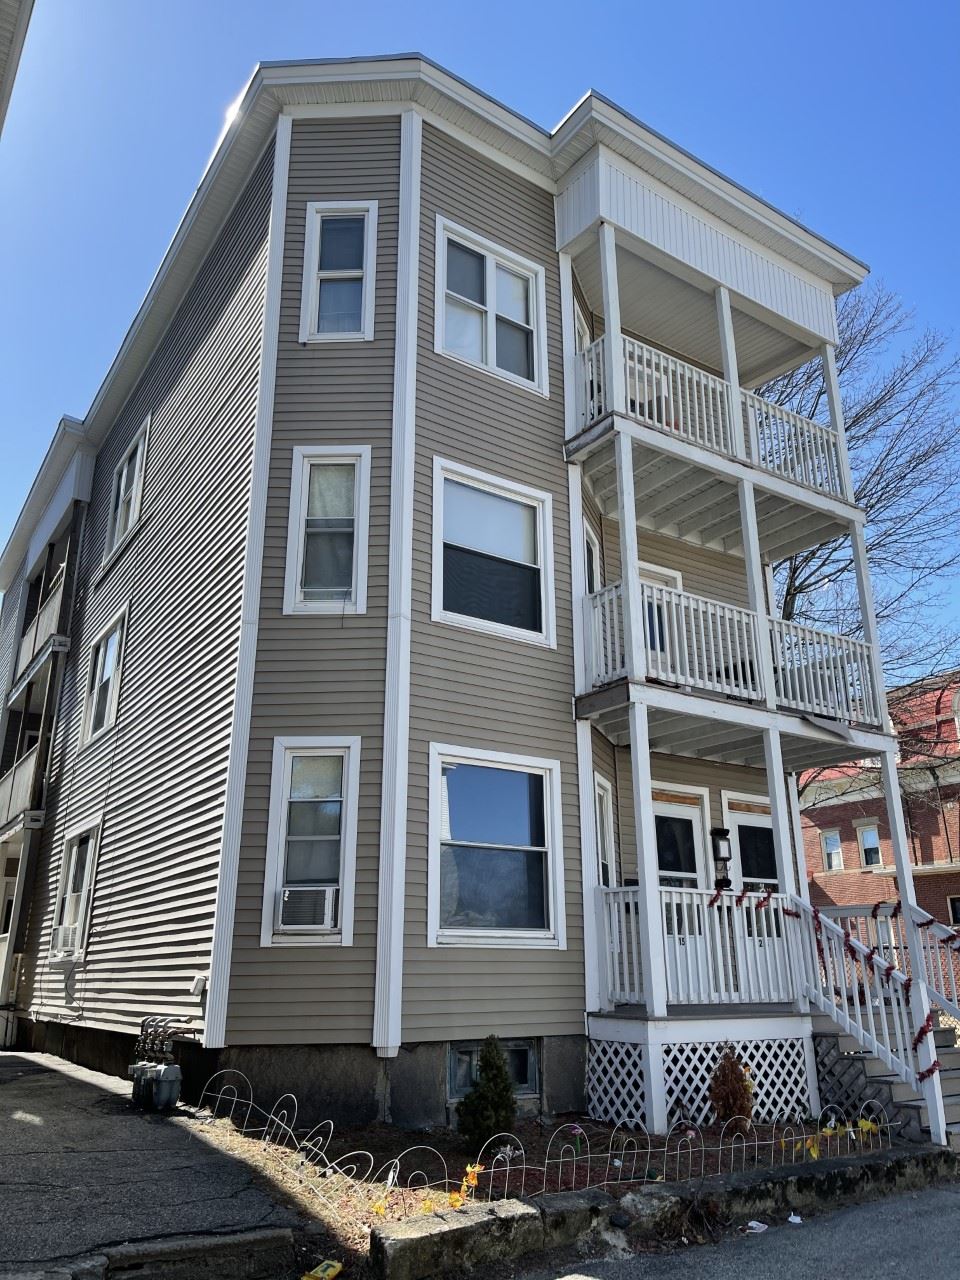 213-215 Spruce Street Manchester, NH Photo